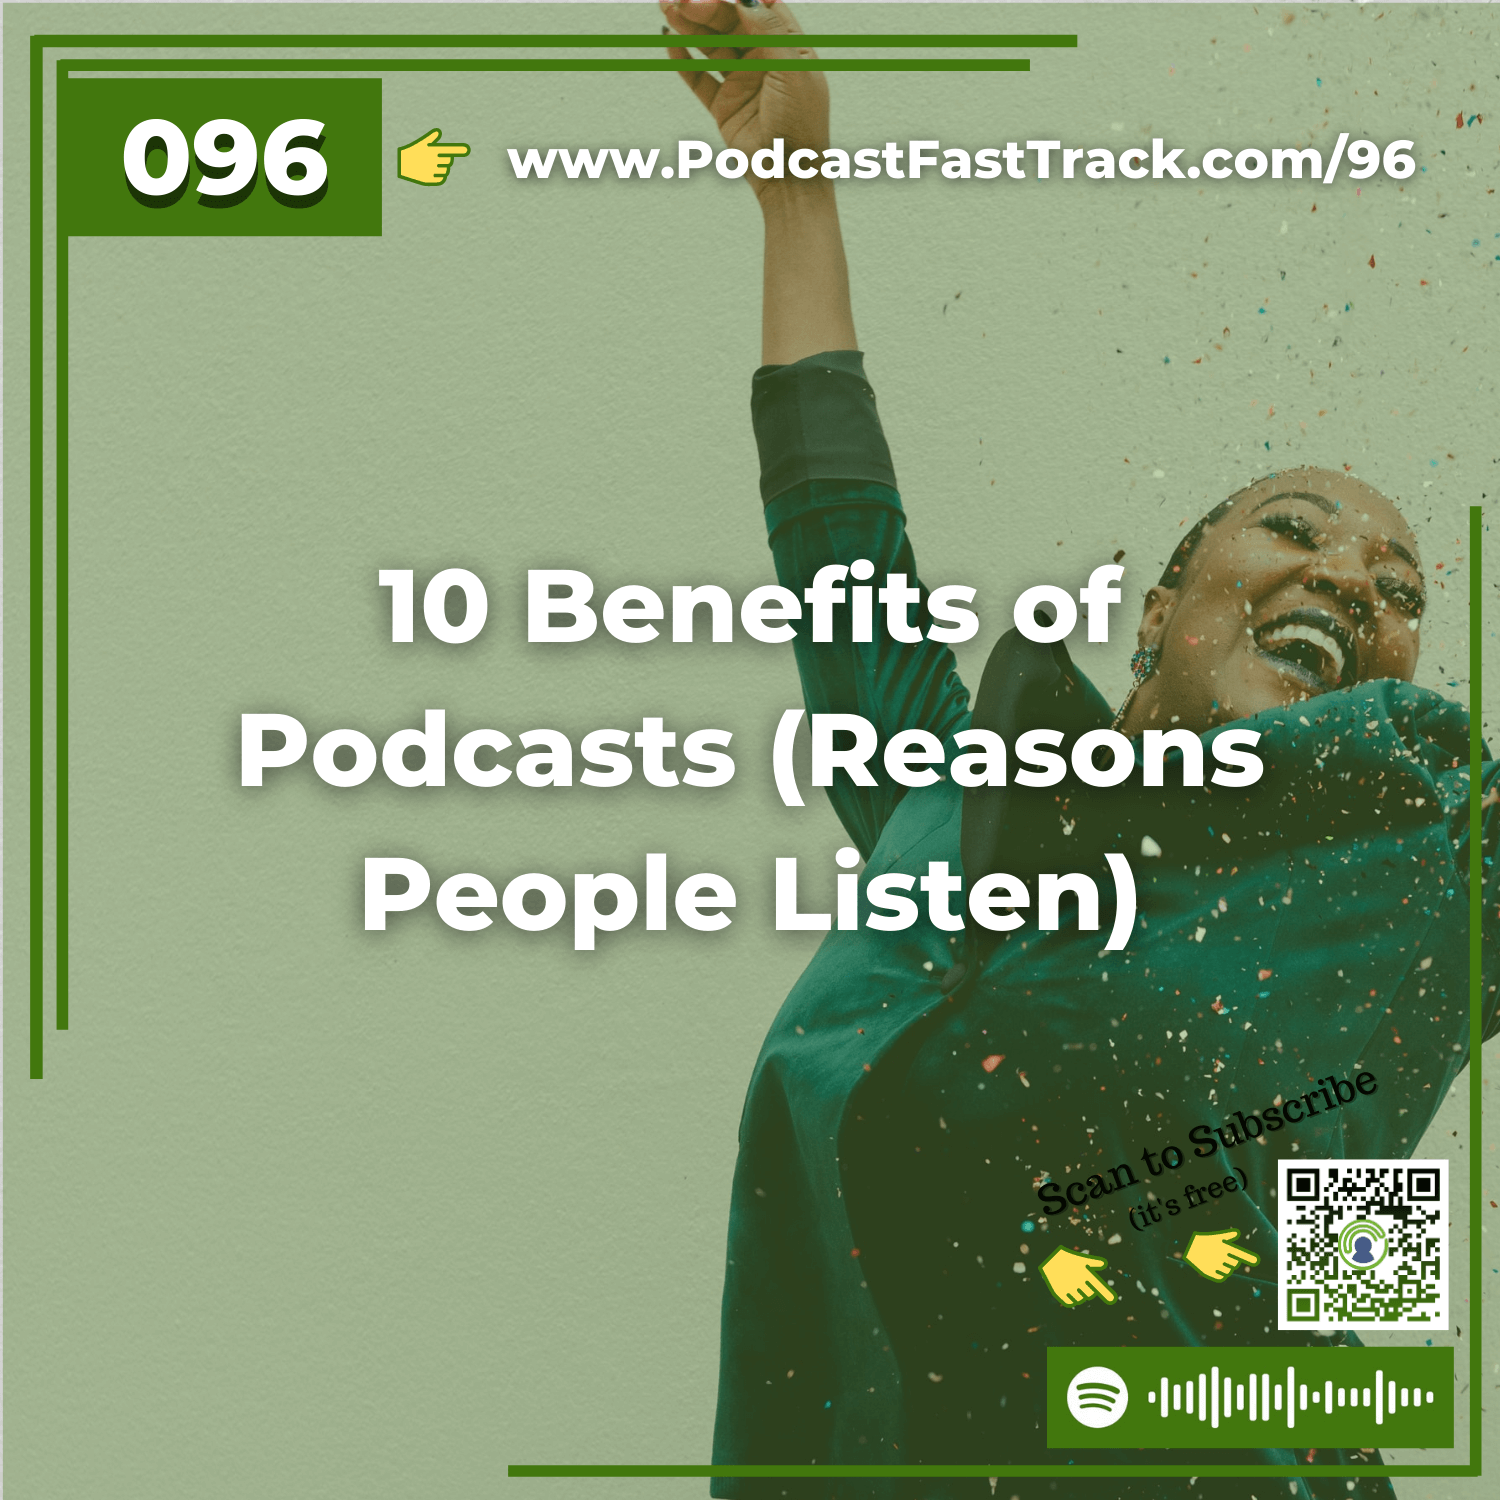 96: 10 Benefits of Podcasts (Reasons People Listen)